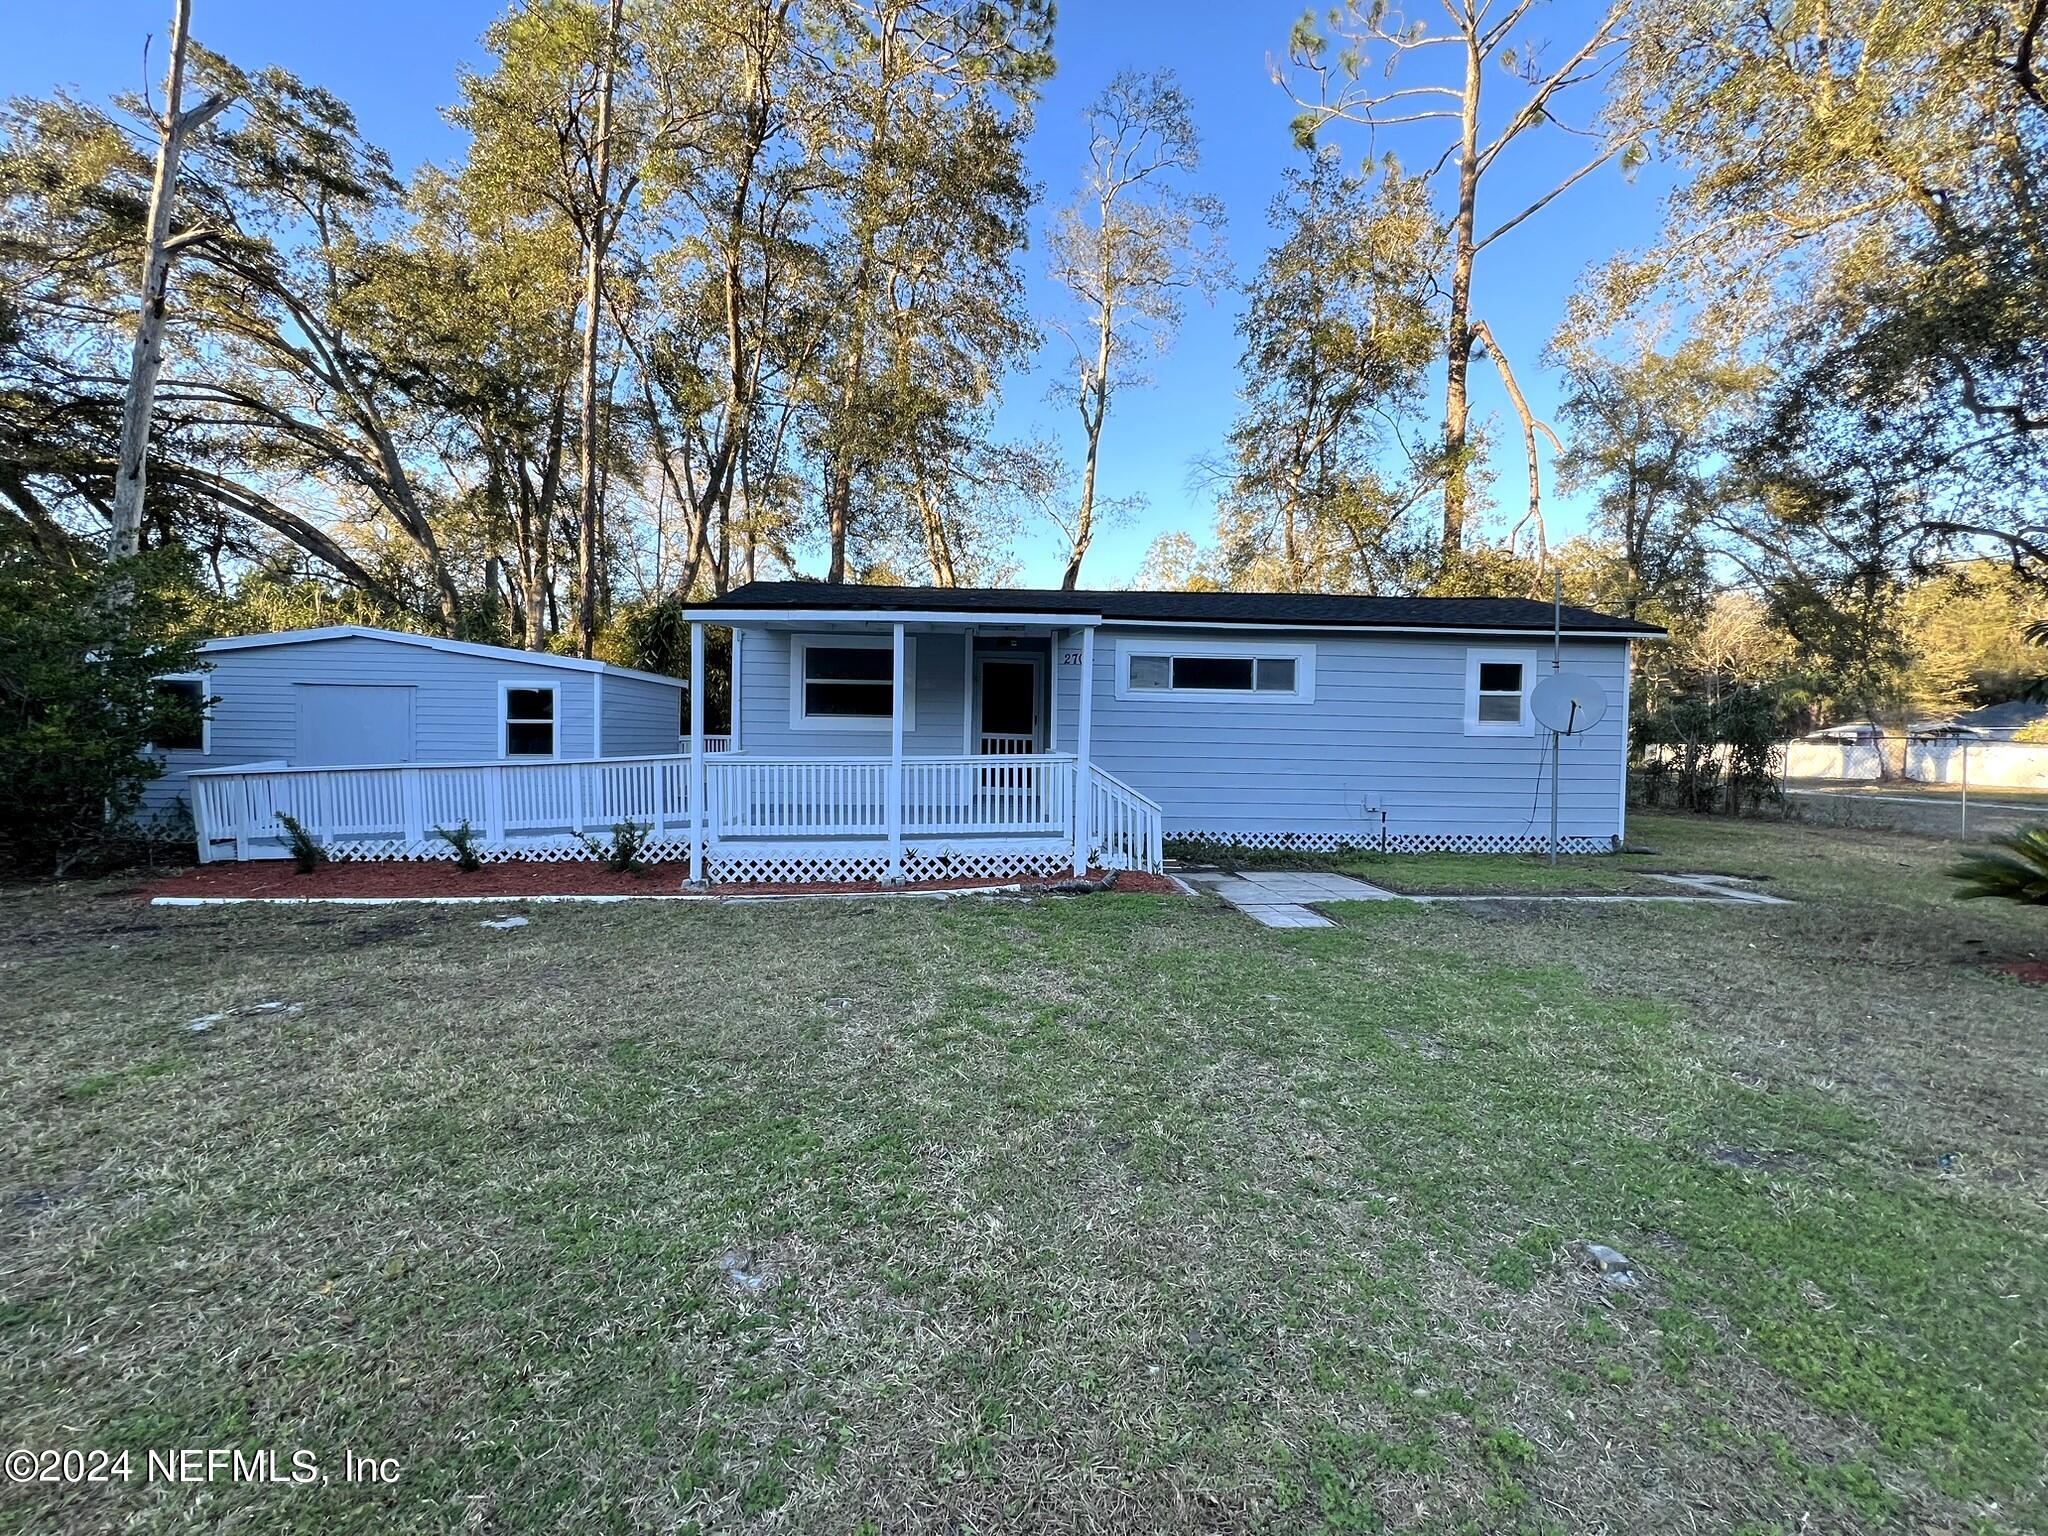 Middleburg, FL home for sale located at 2704 Forman Circle, Middleburg, FL 32068